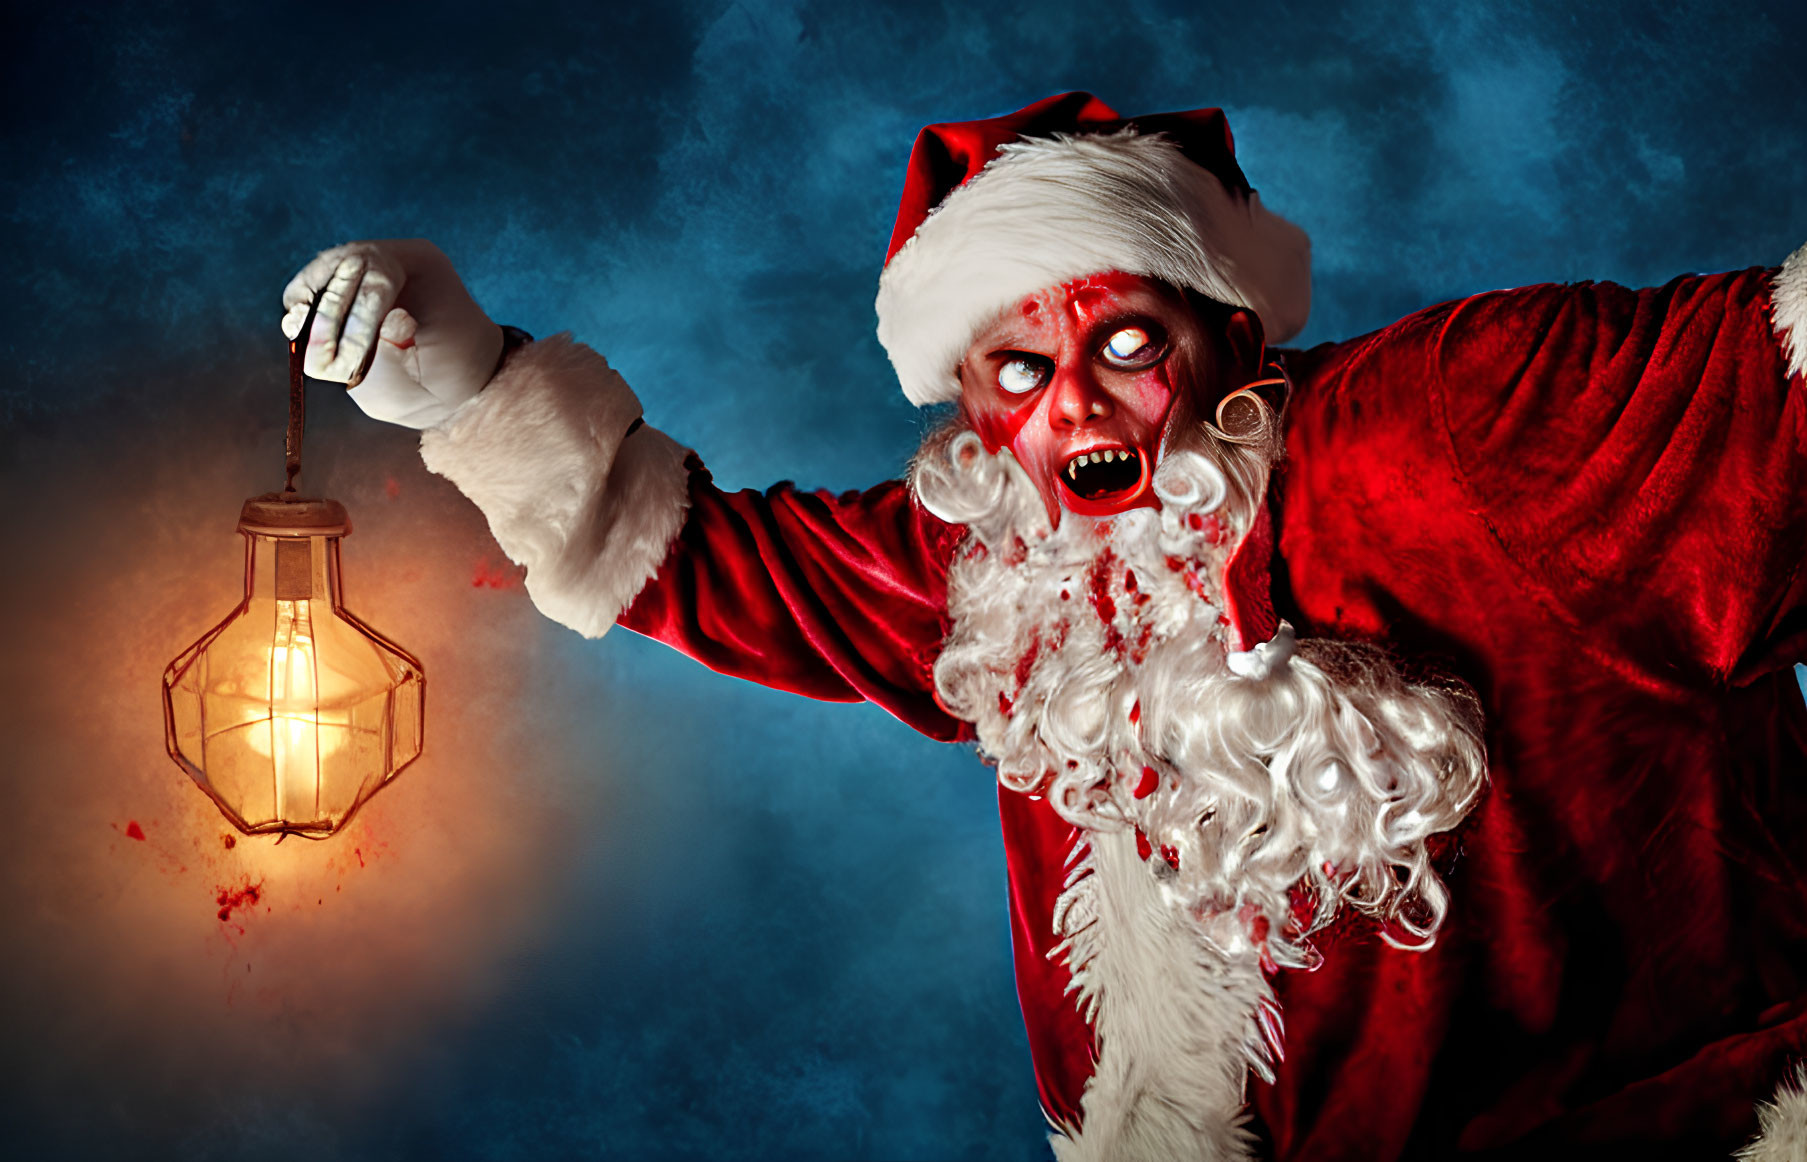 Creepy Santa Claus with Red Eyes and Lantern on Blue Background